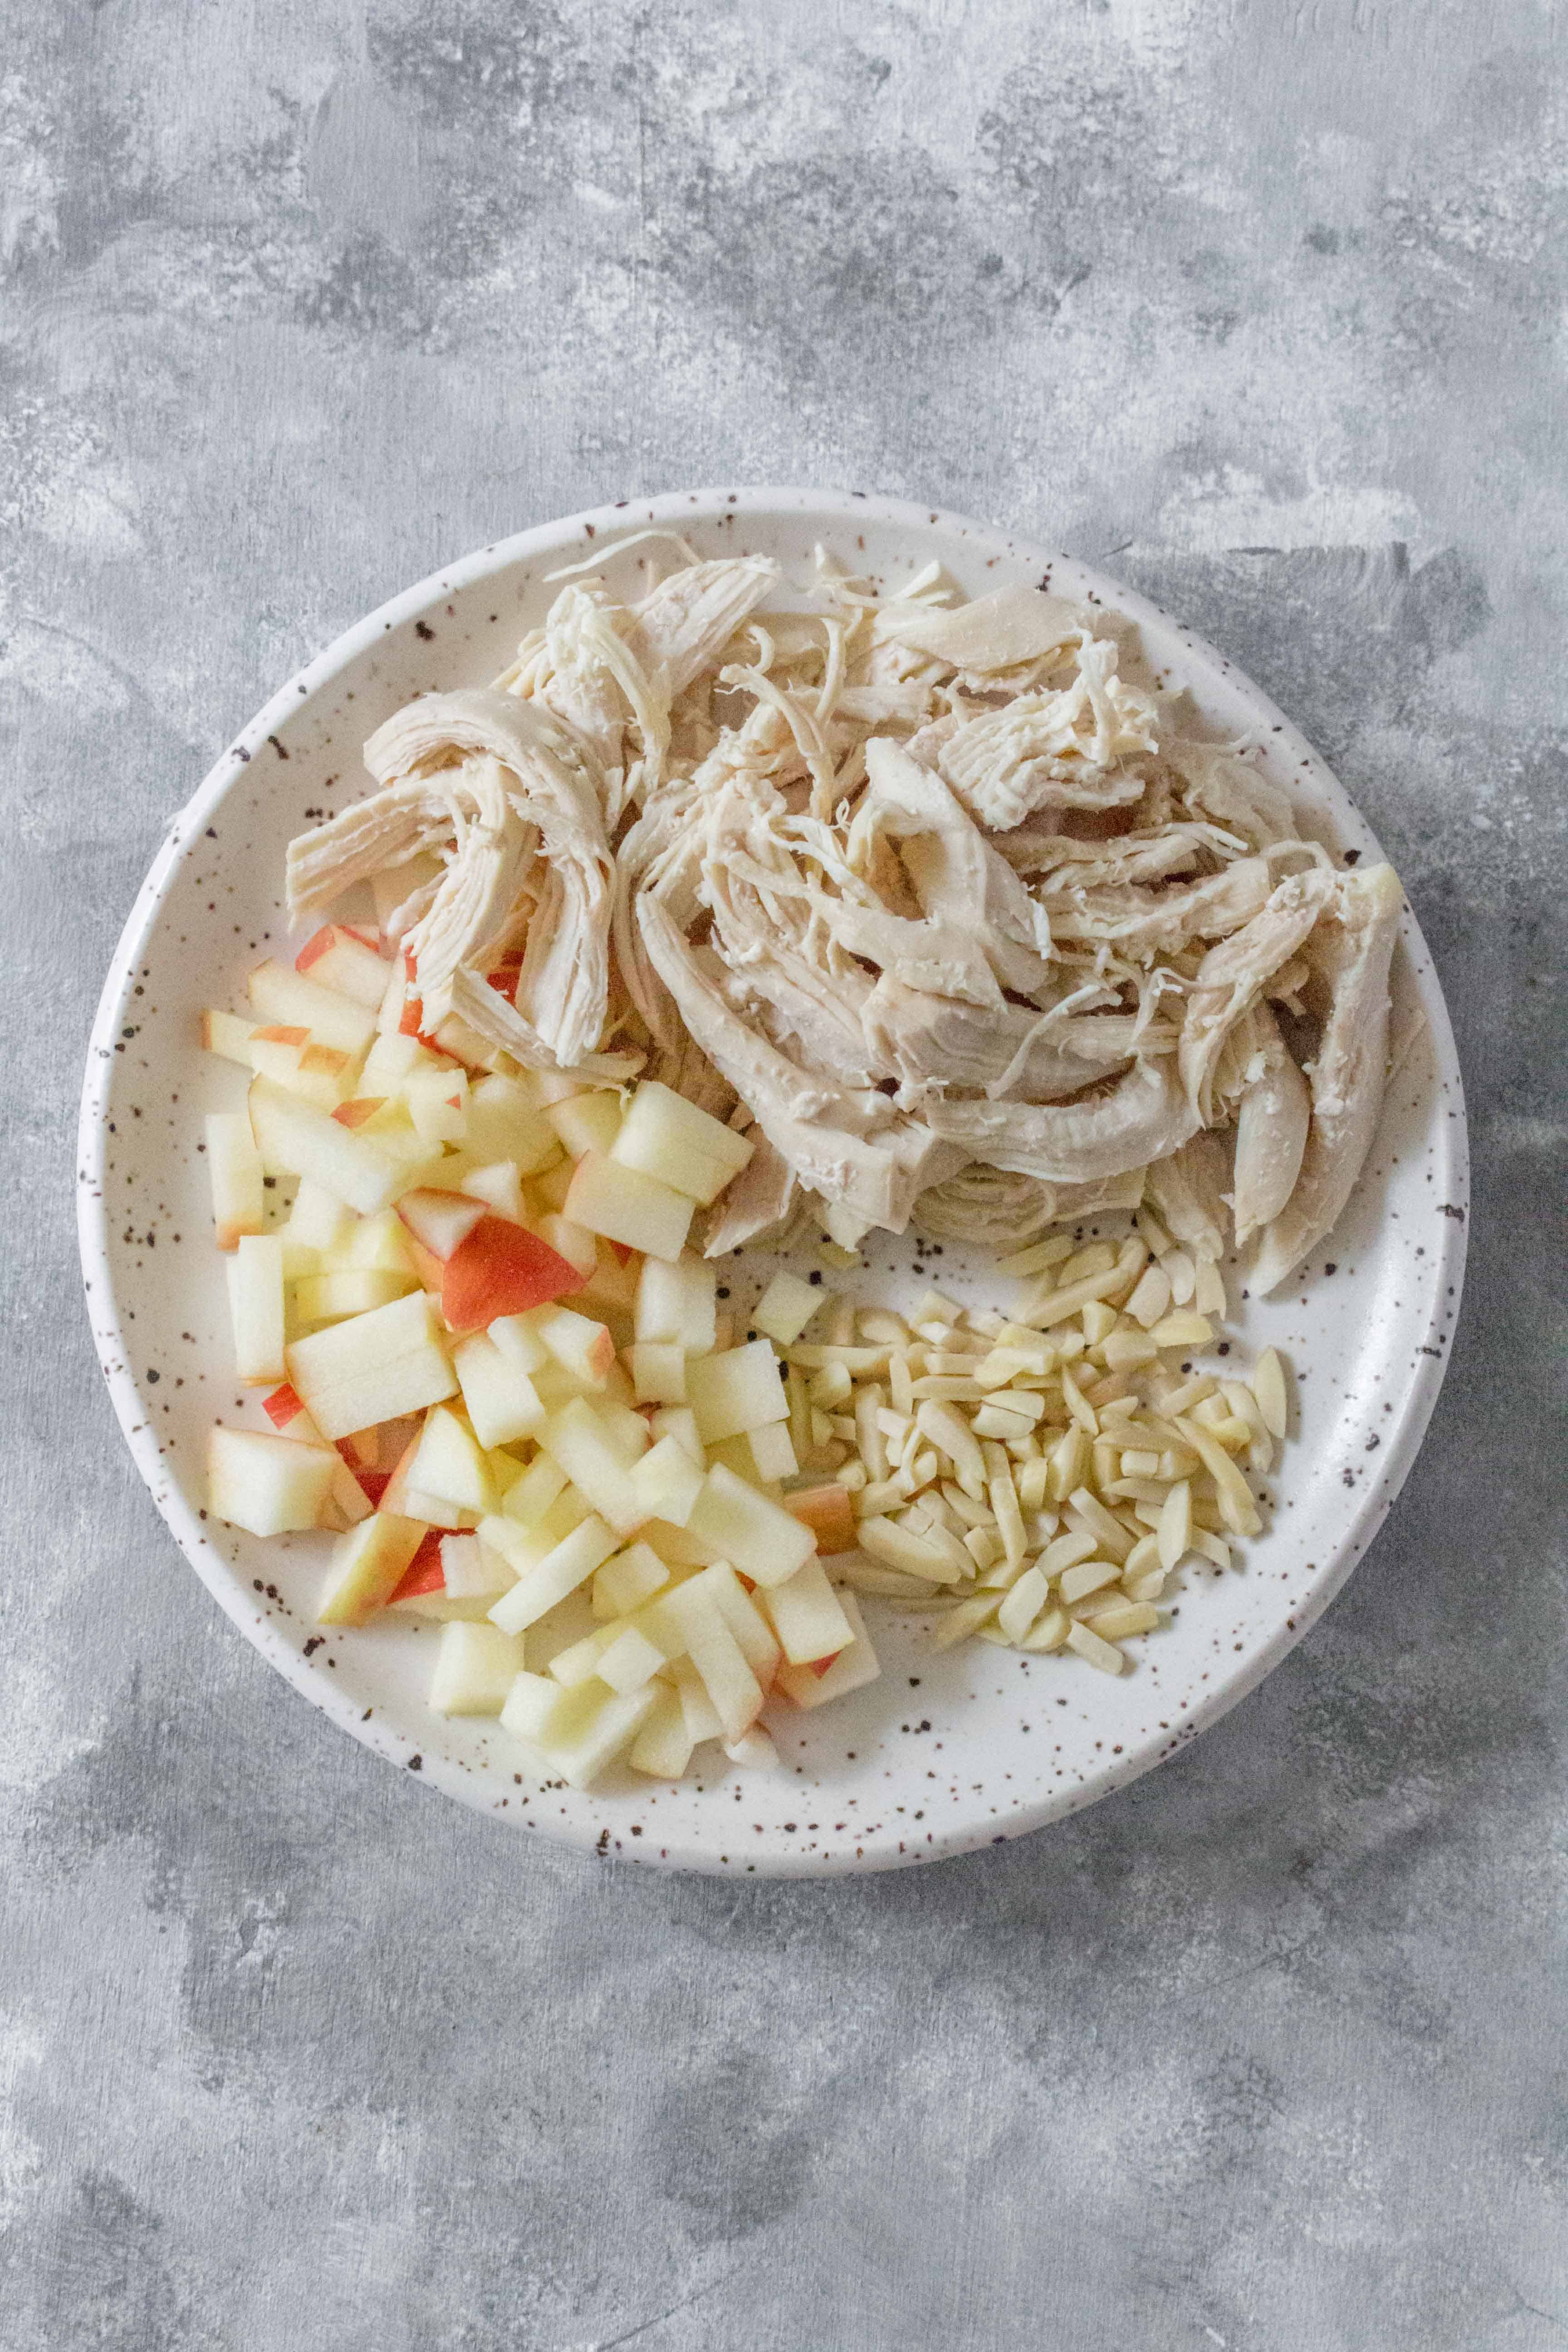 This no mayo Healthy Chicken Salad is going to be a lifesaver this summer! Healthy enough to eat regularly and easy to make, you're going to want to make this Healthy Chicken Salad all summer.